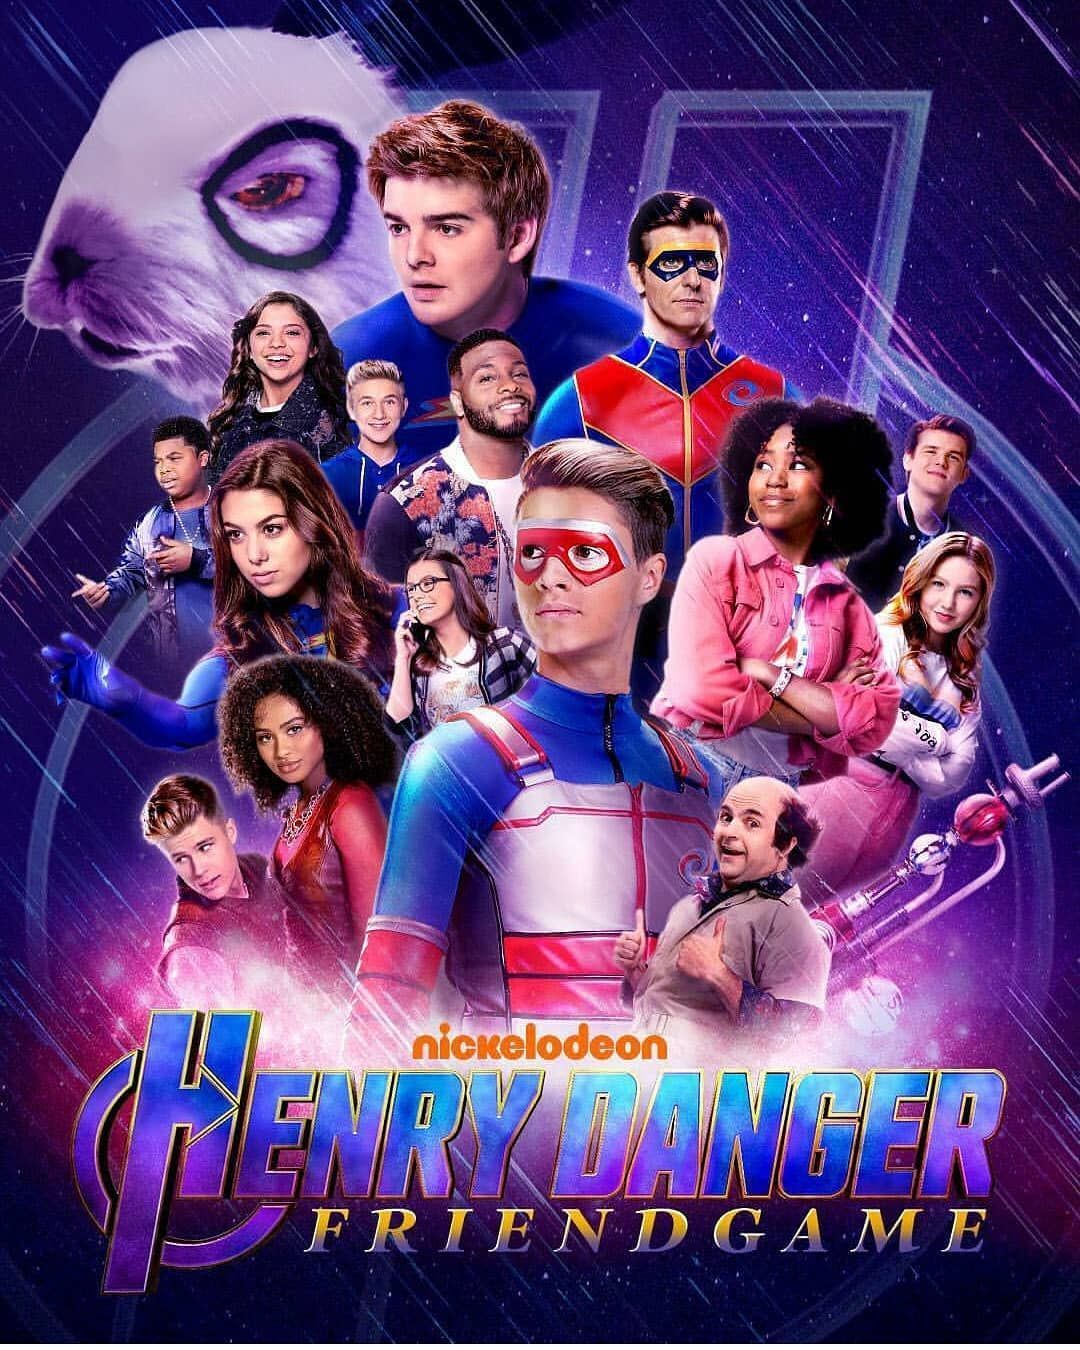 Image may contain: 15 people, people standing and text. Nickelodeon shows, Henry danger nickelodeon, Nickelodeon the thundermans